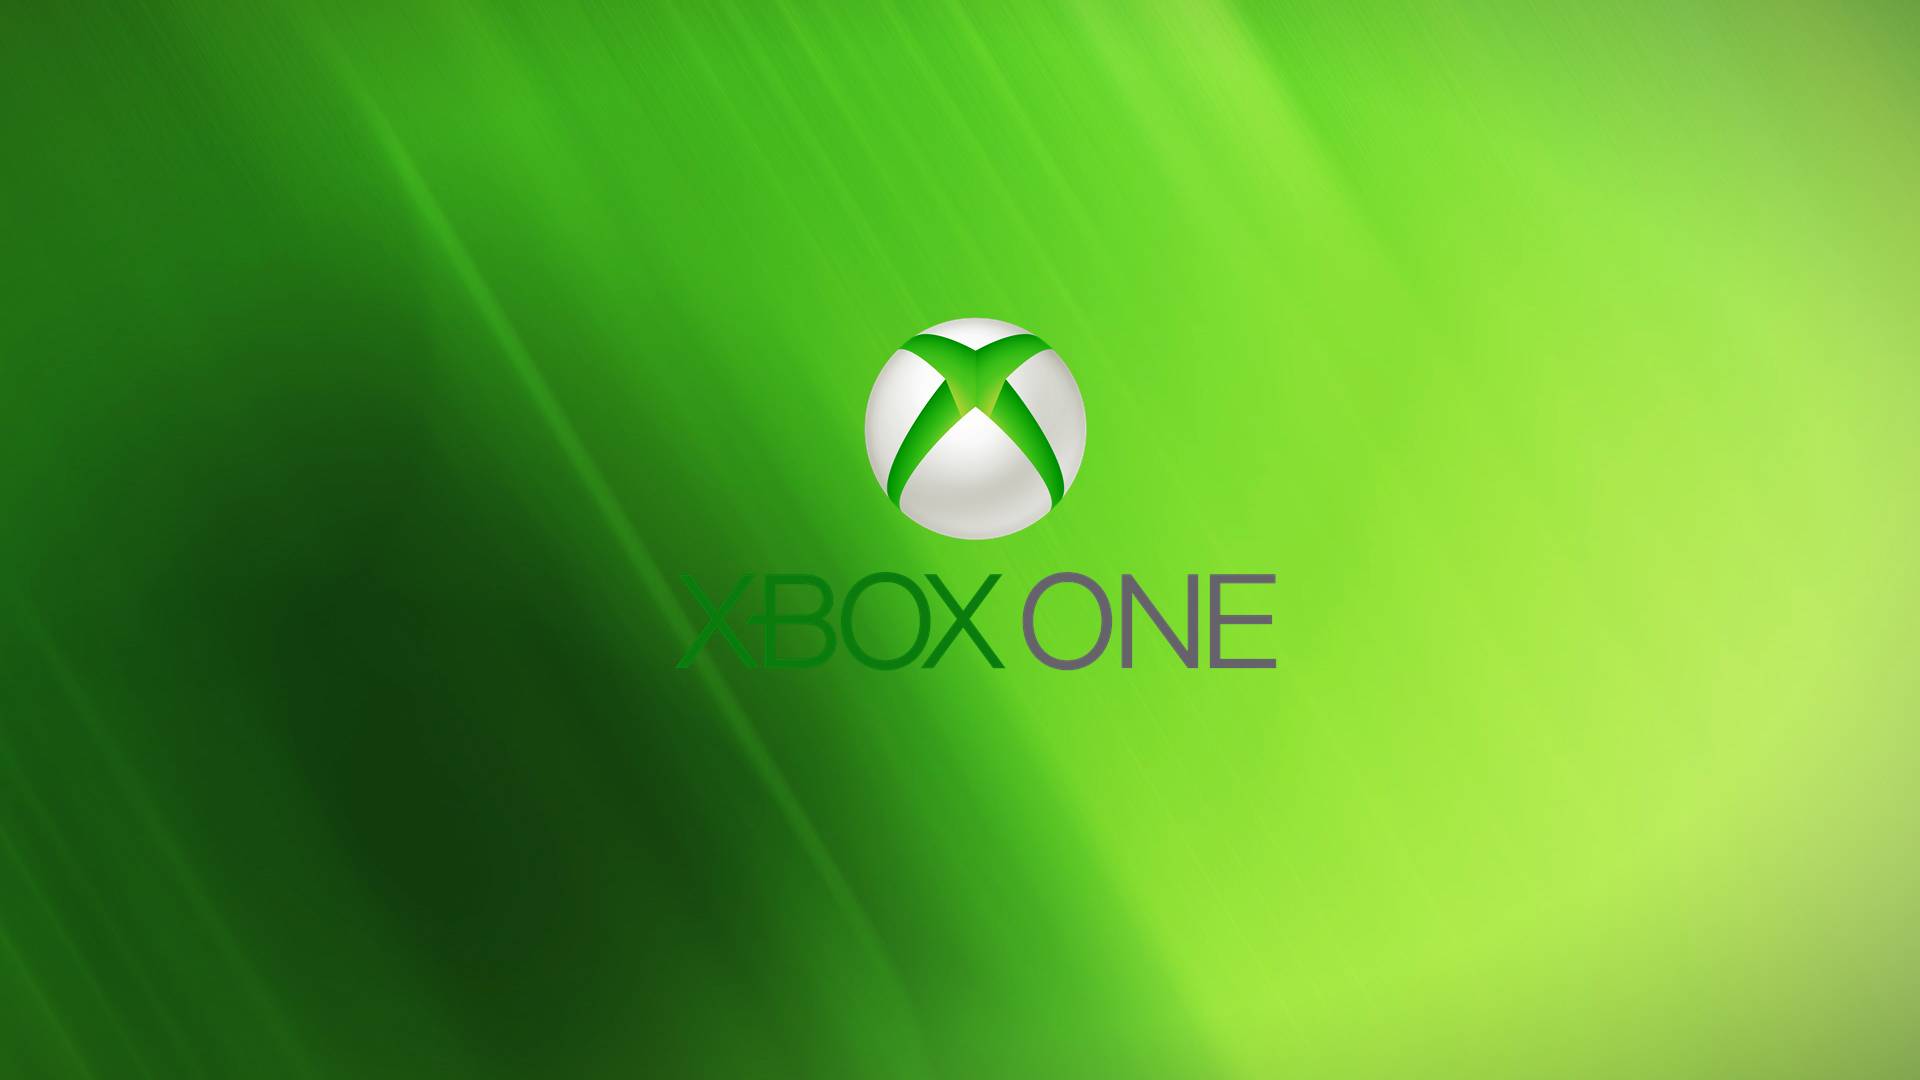 Xbox Wallpapers on WallpaperDog